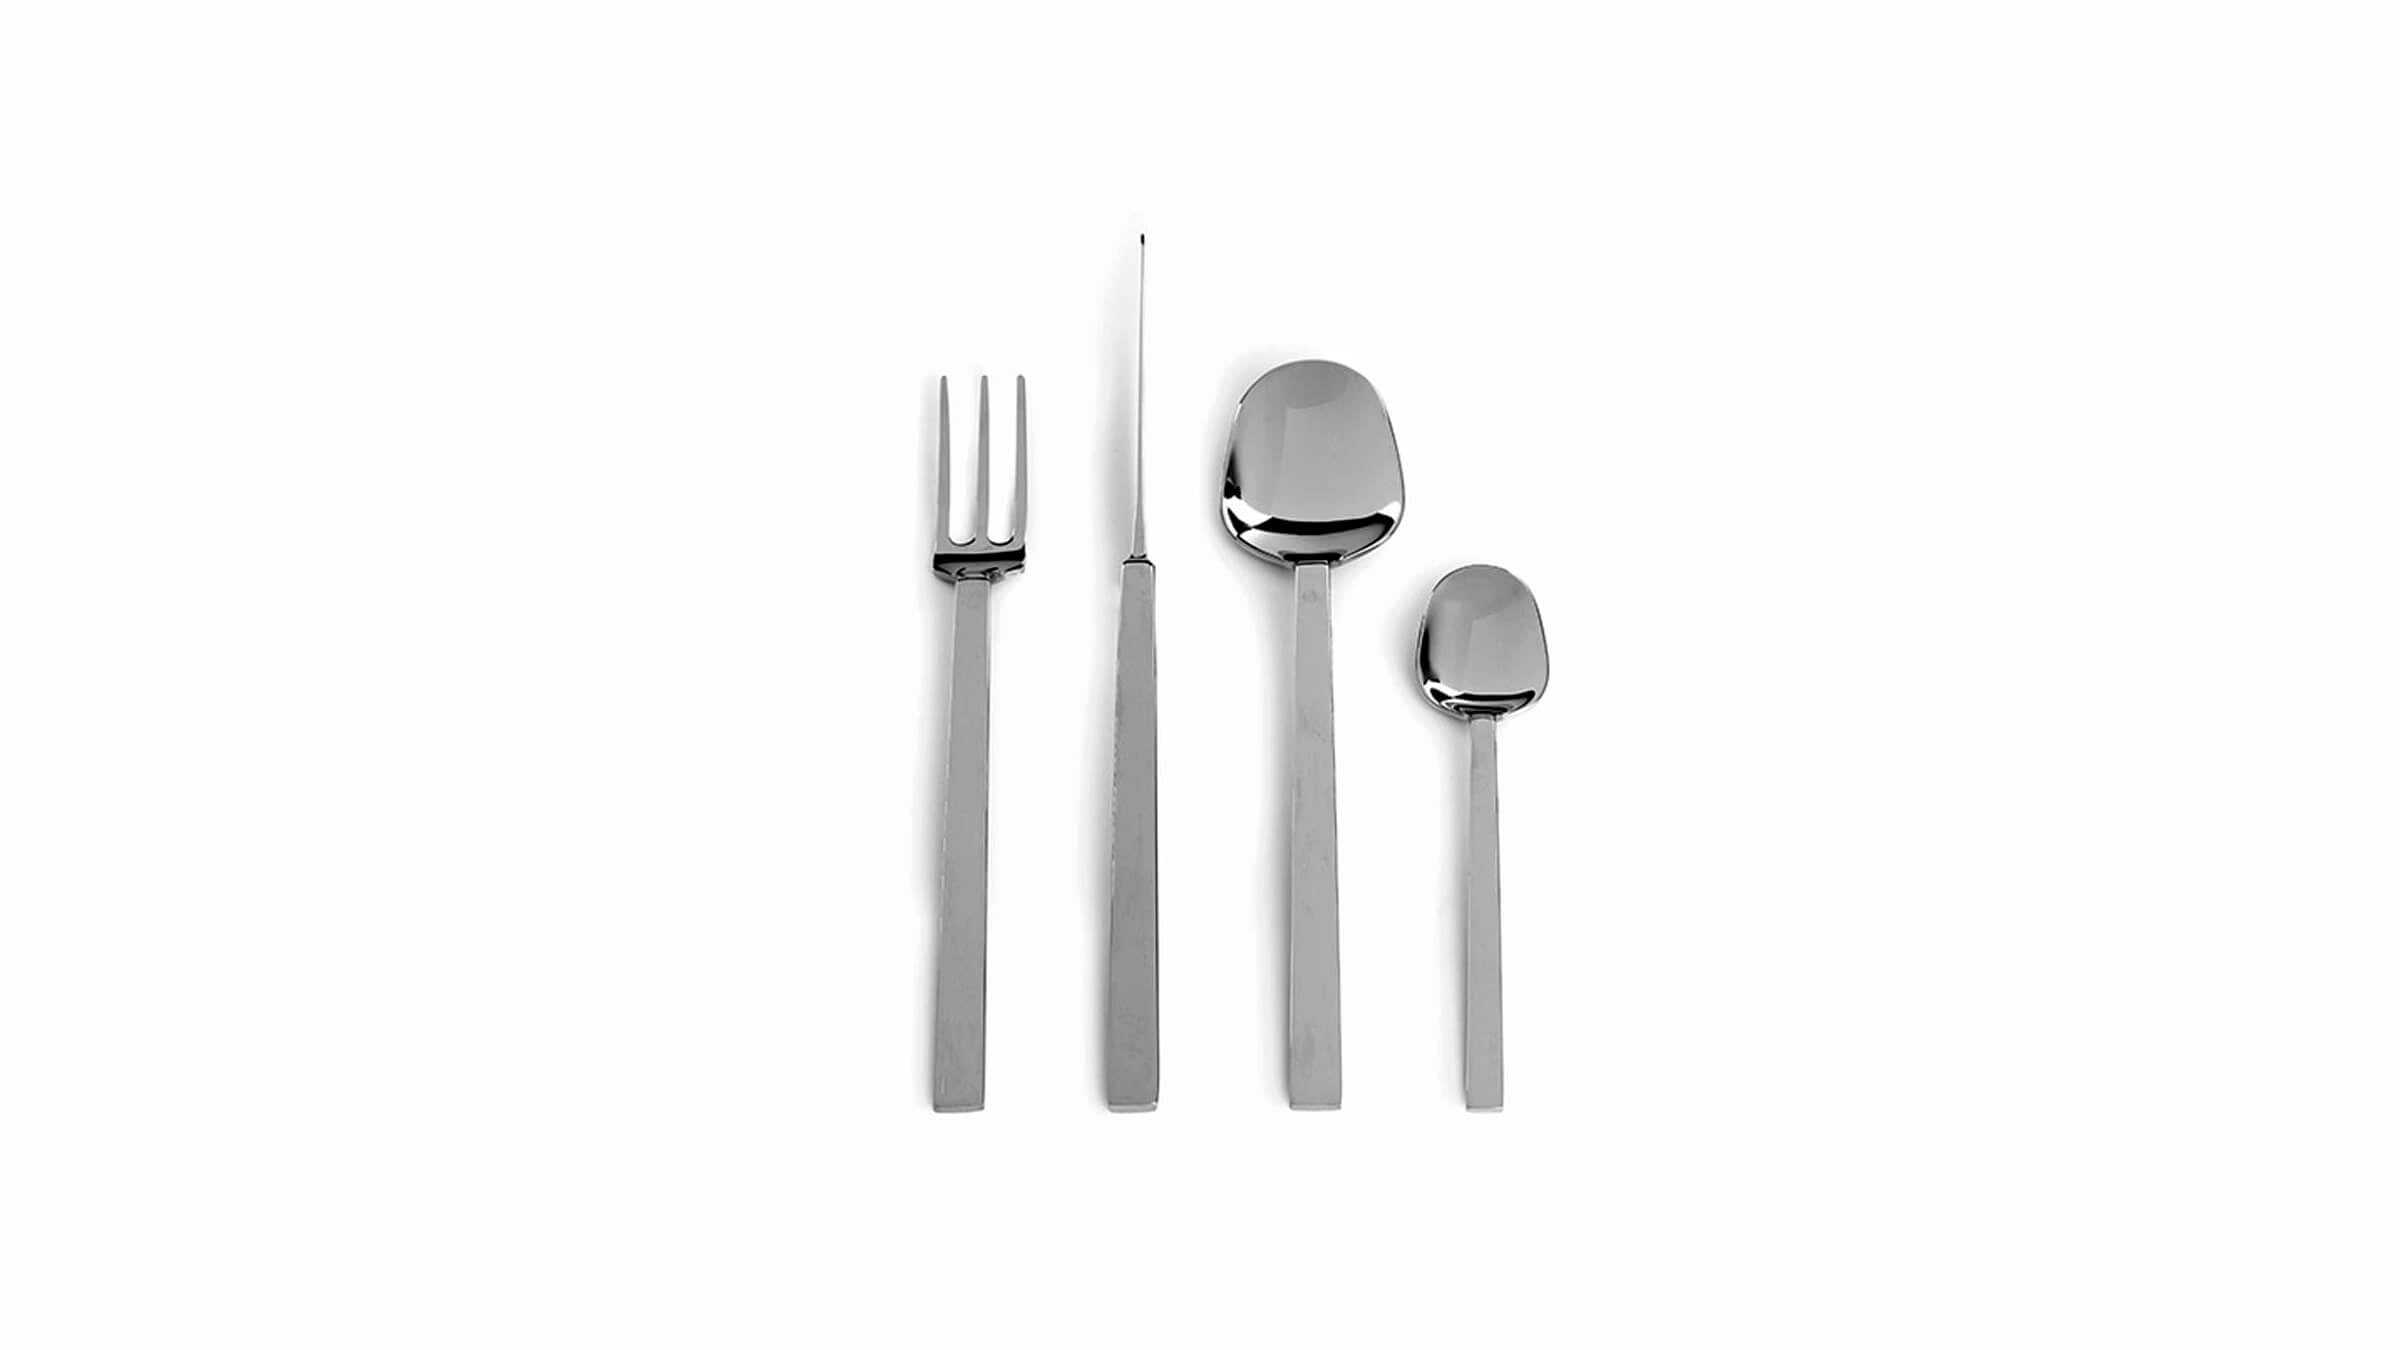 2pcs Cat Paw Pattern Stainless Steel Cutlery Set, Creative Useful Tableware Cutlery  Set For Eating